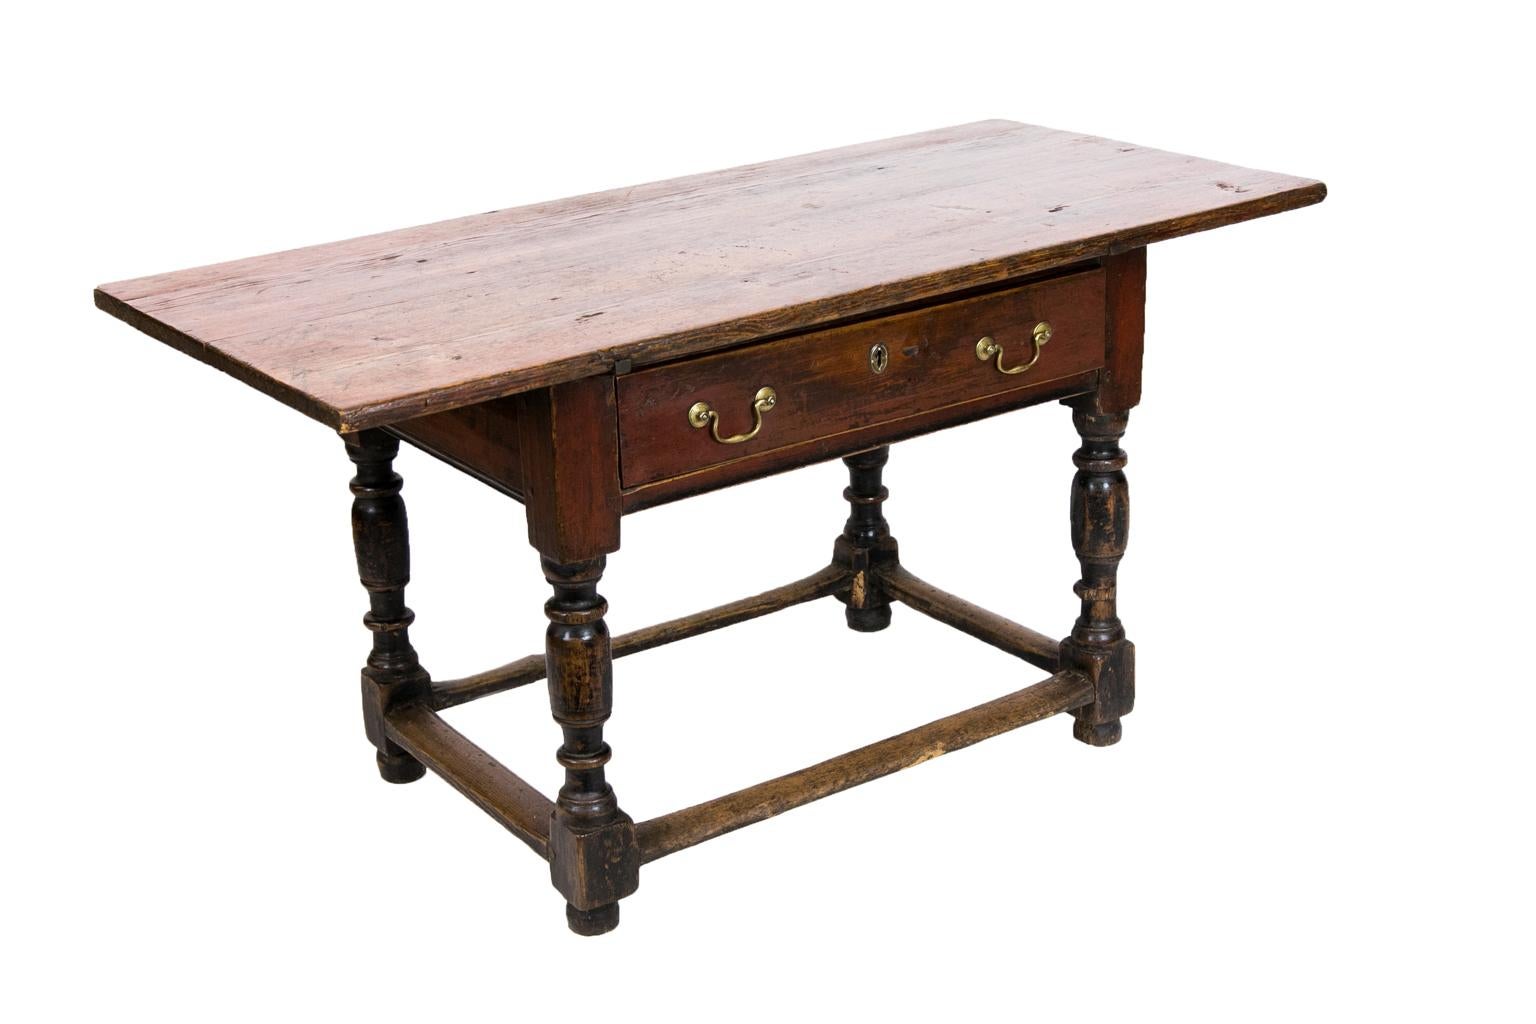 Early 19th Century One-Drawer Pine Tavern Table